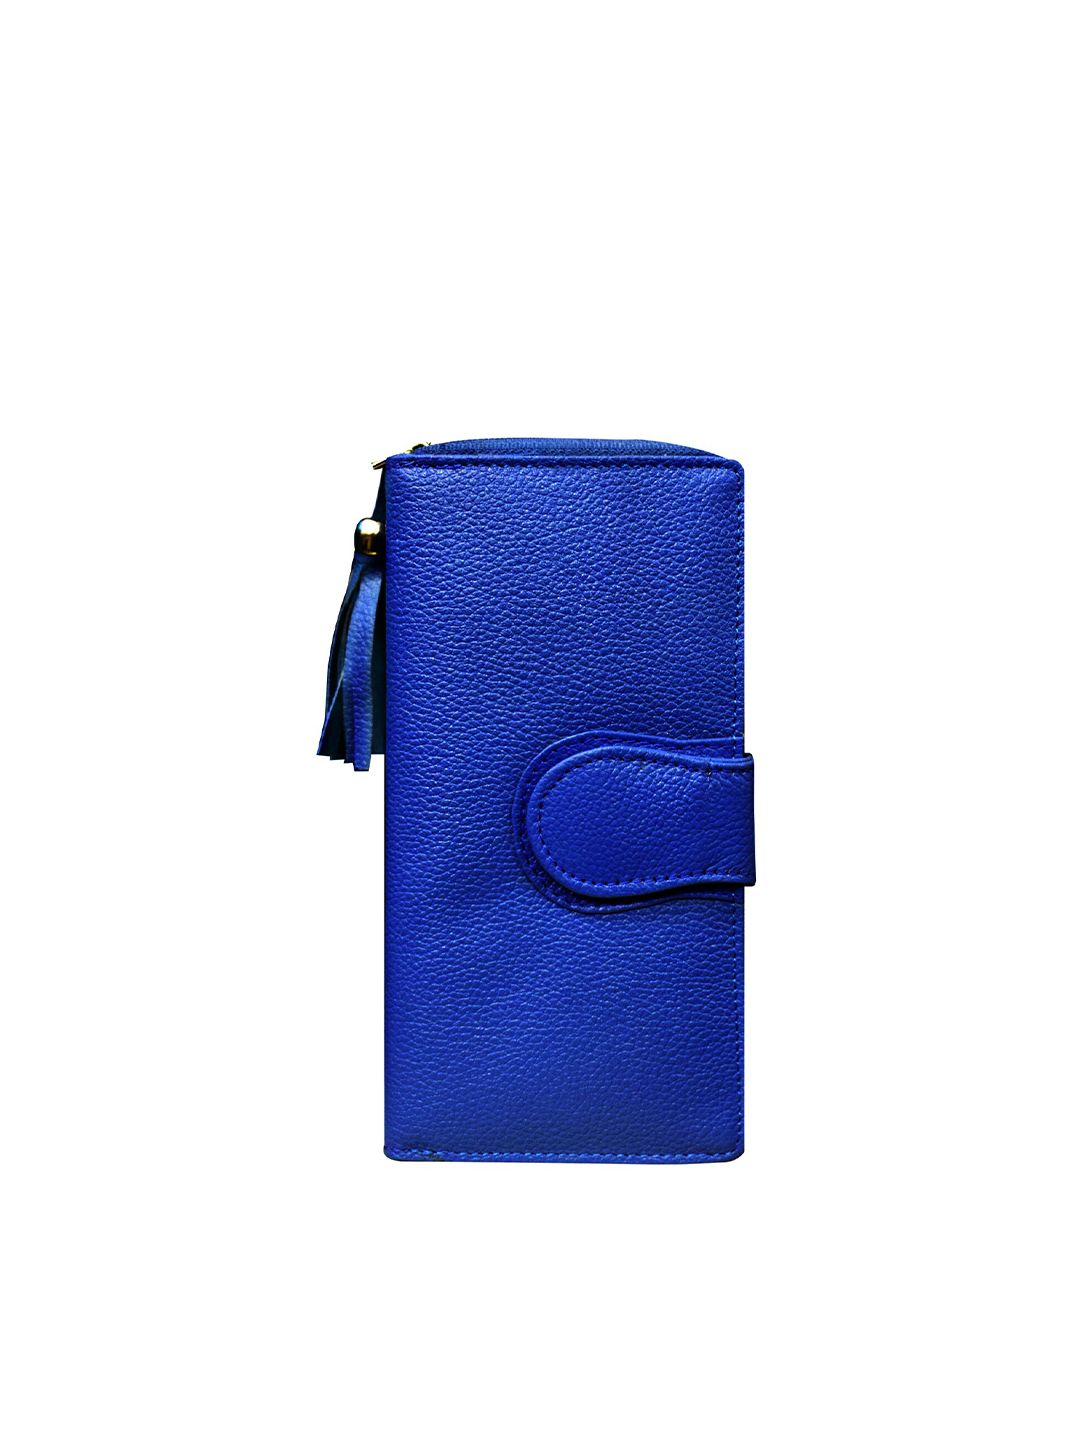 ABYS Women Blue Leather Zip Around Wallet Price in India